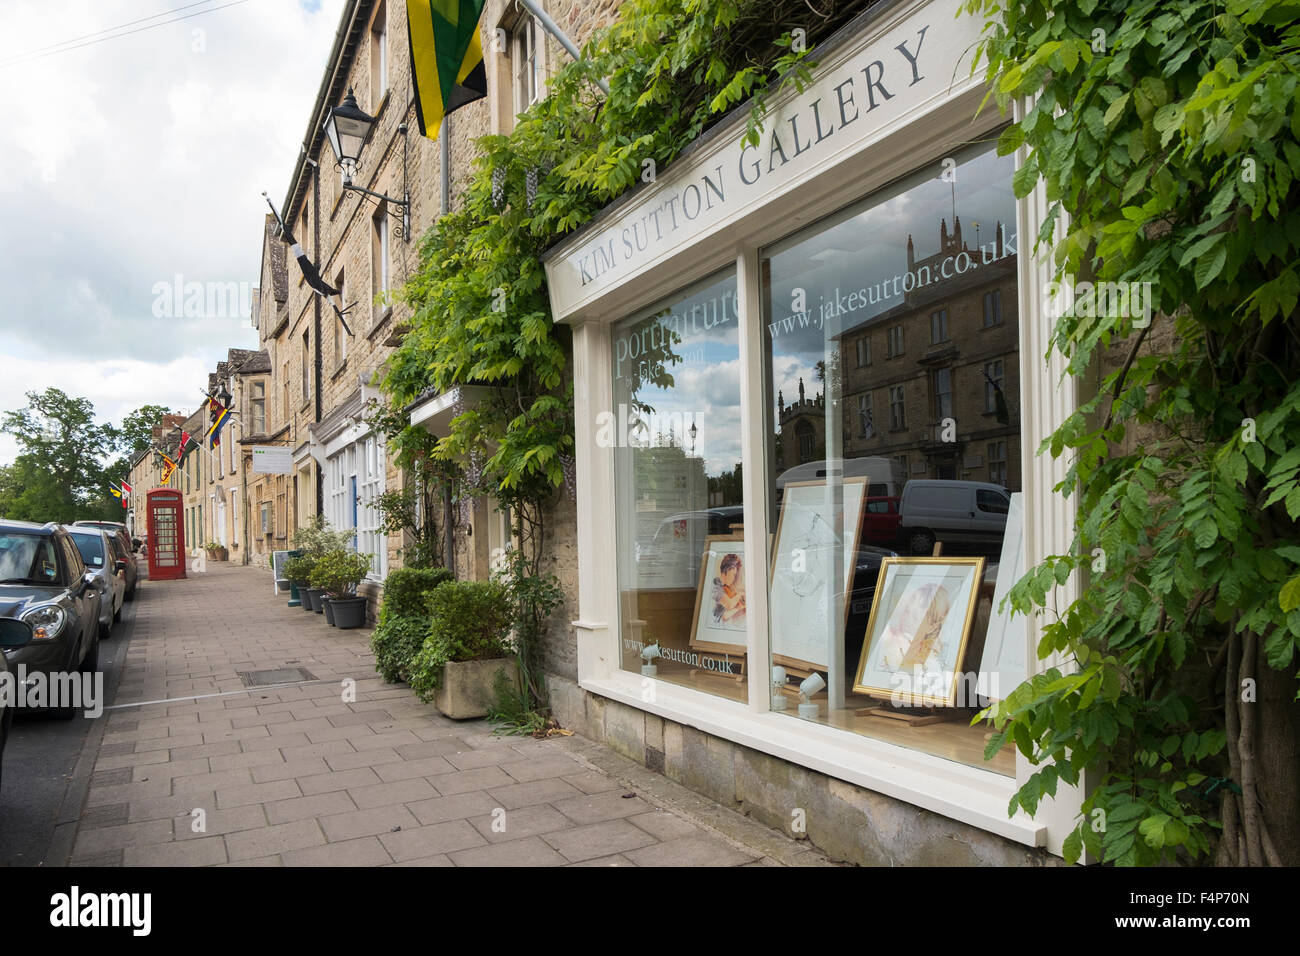 Kim Sutton Art Gallery in the High Street in Fairford, Gloucestershire, UK Stock Photo